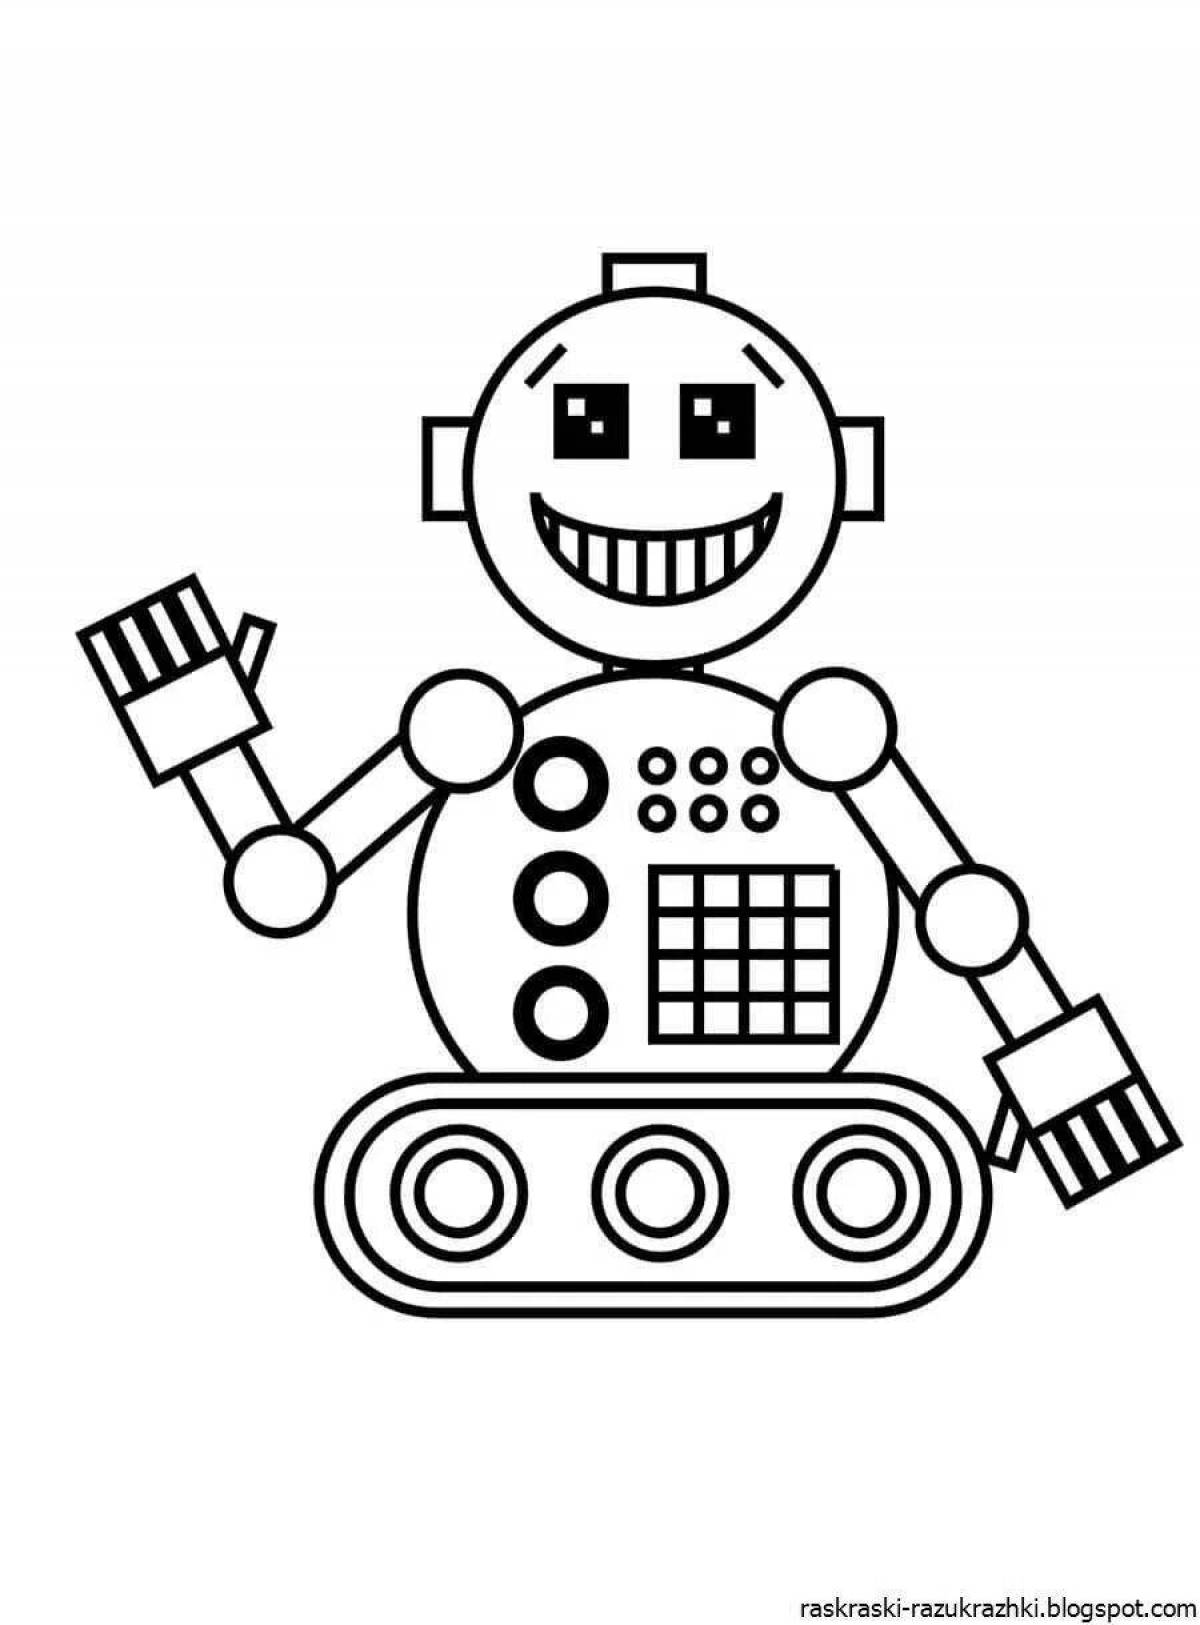 Adorable tobots coloring book for kids